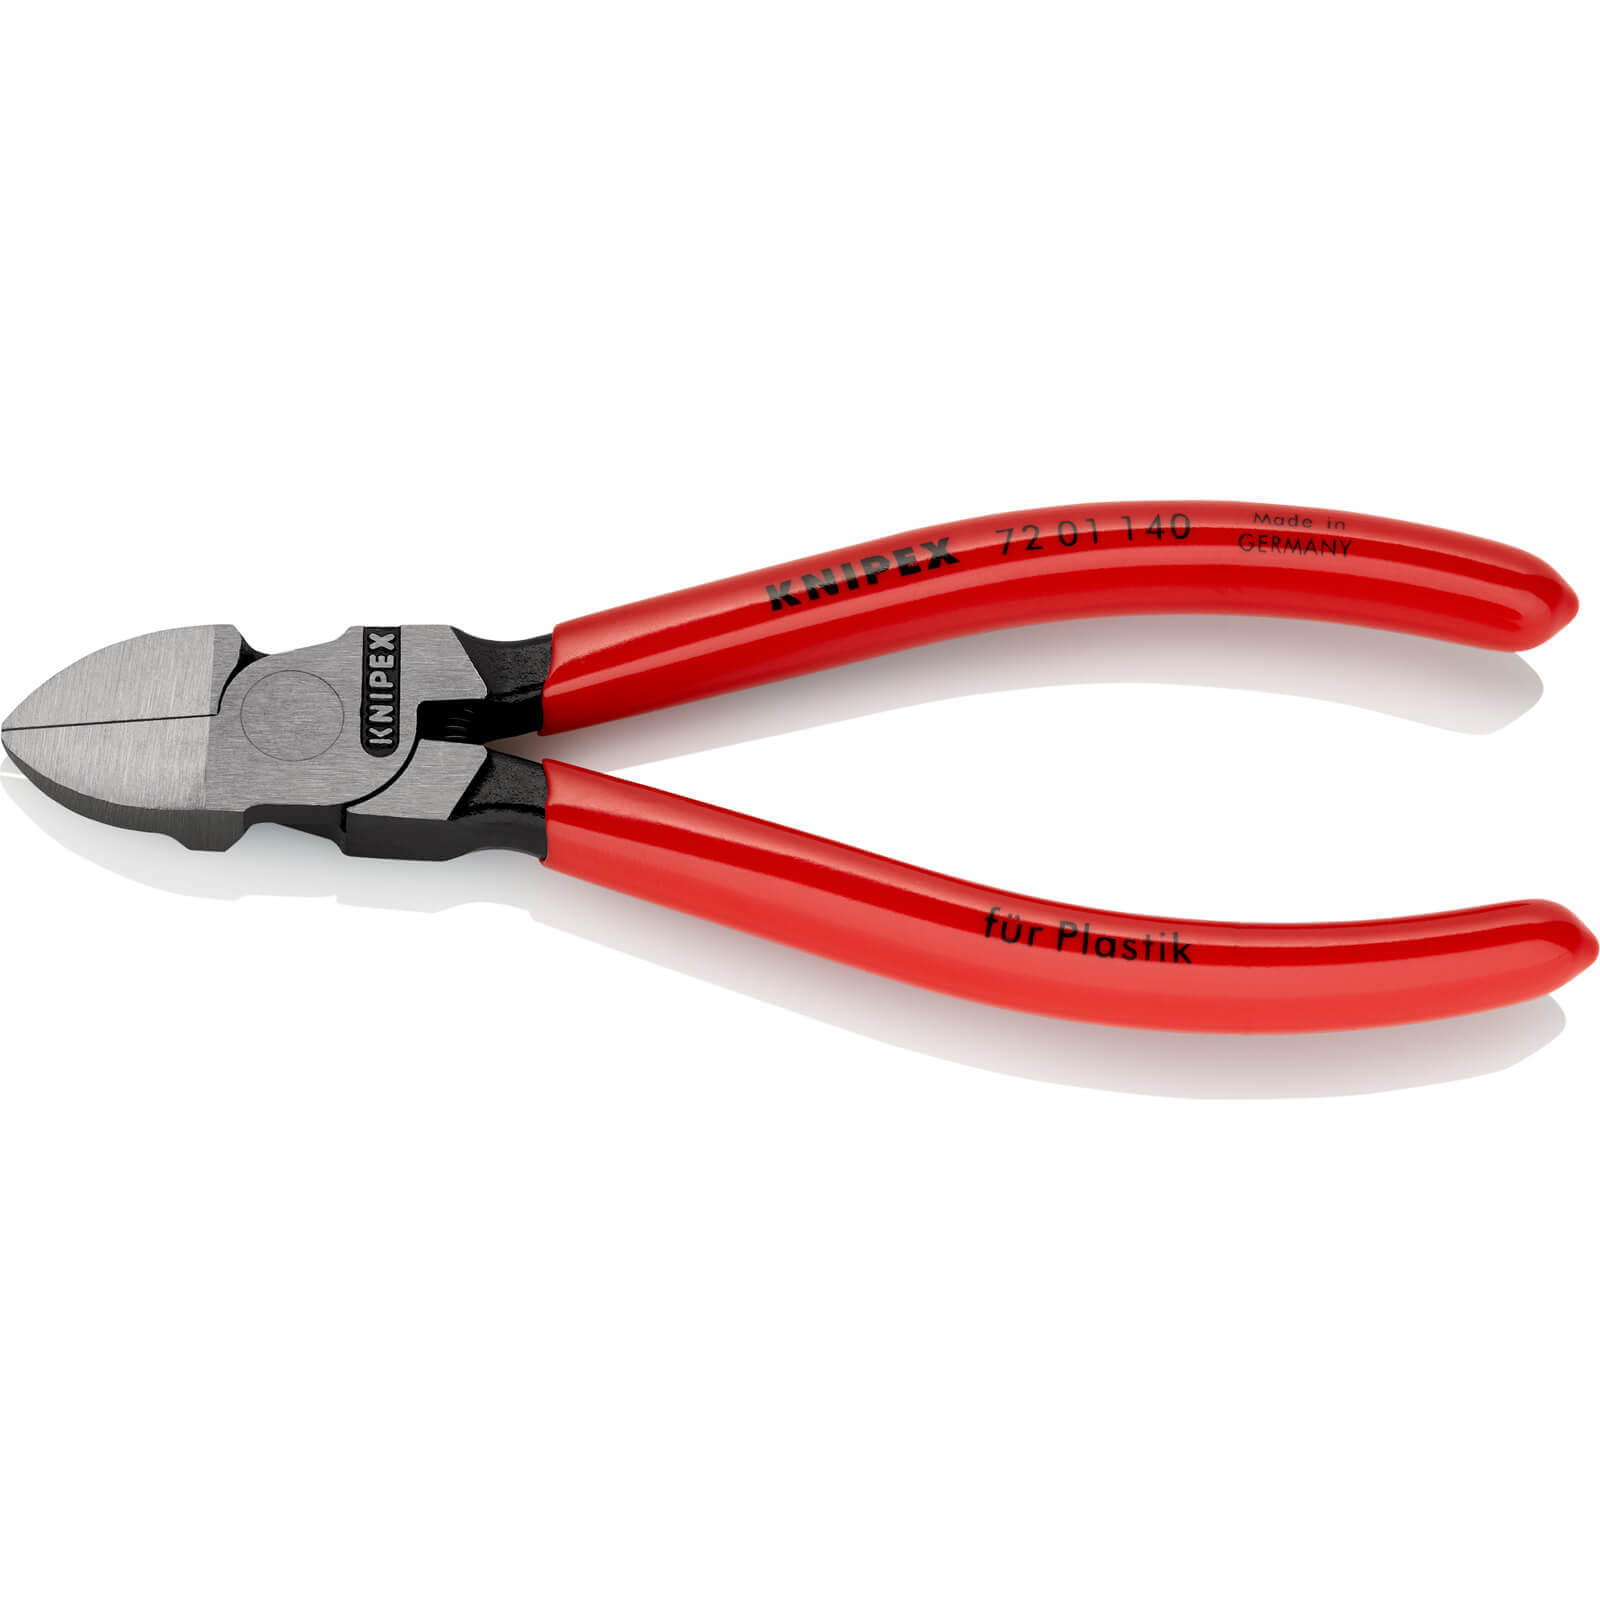 Image of Knipex 72 01 Diagonal Cutting Pliers for Plastics 140mm